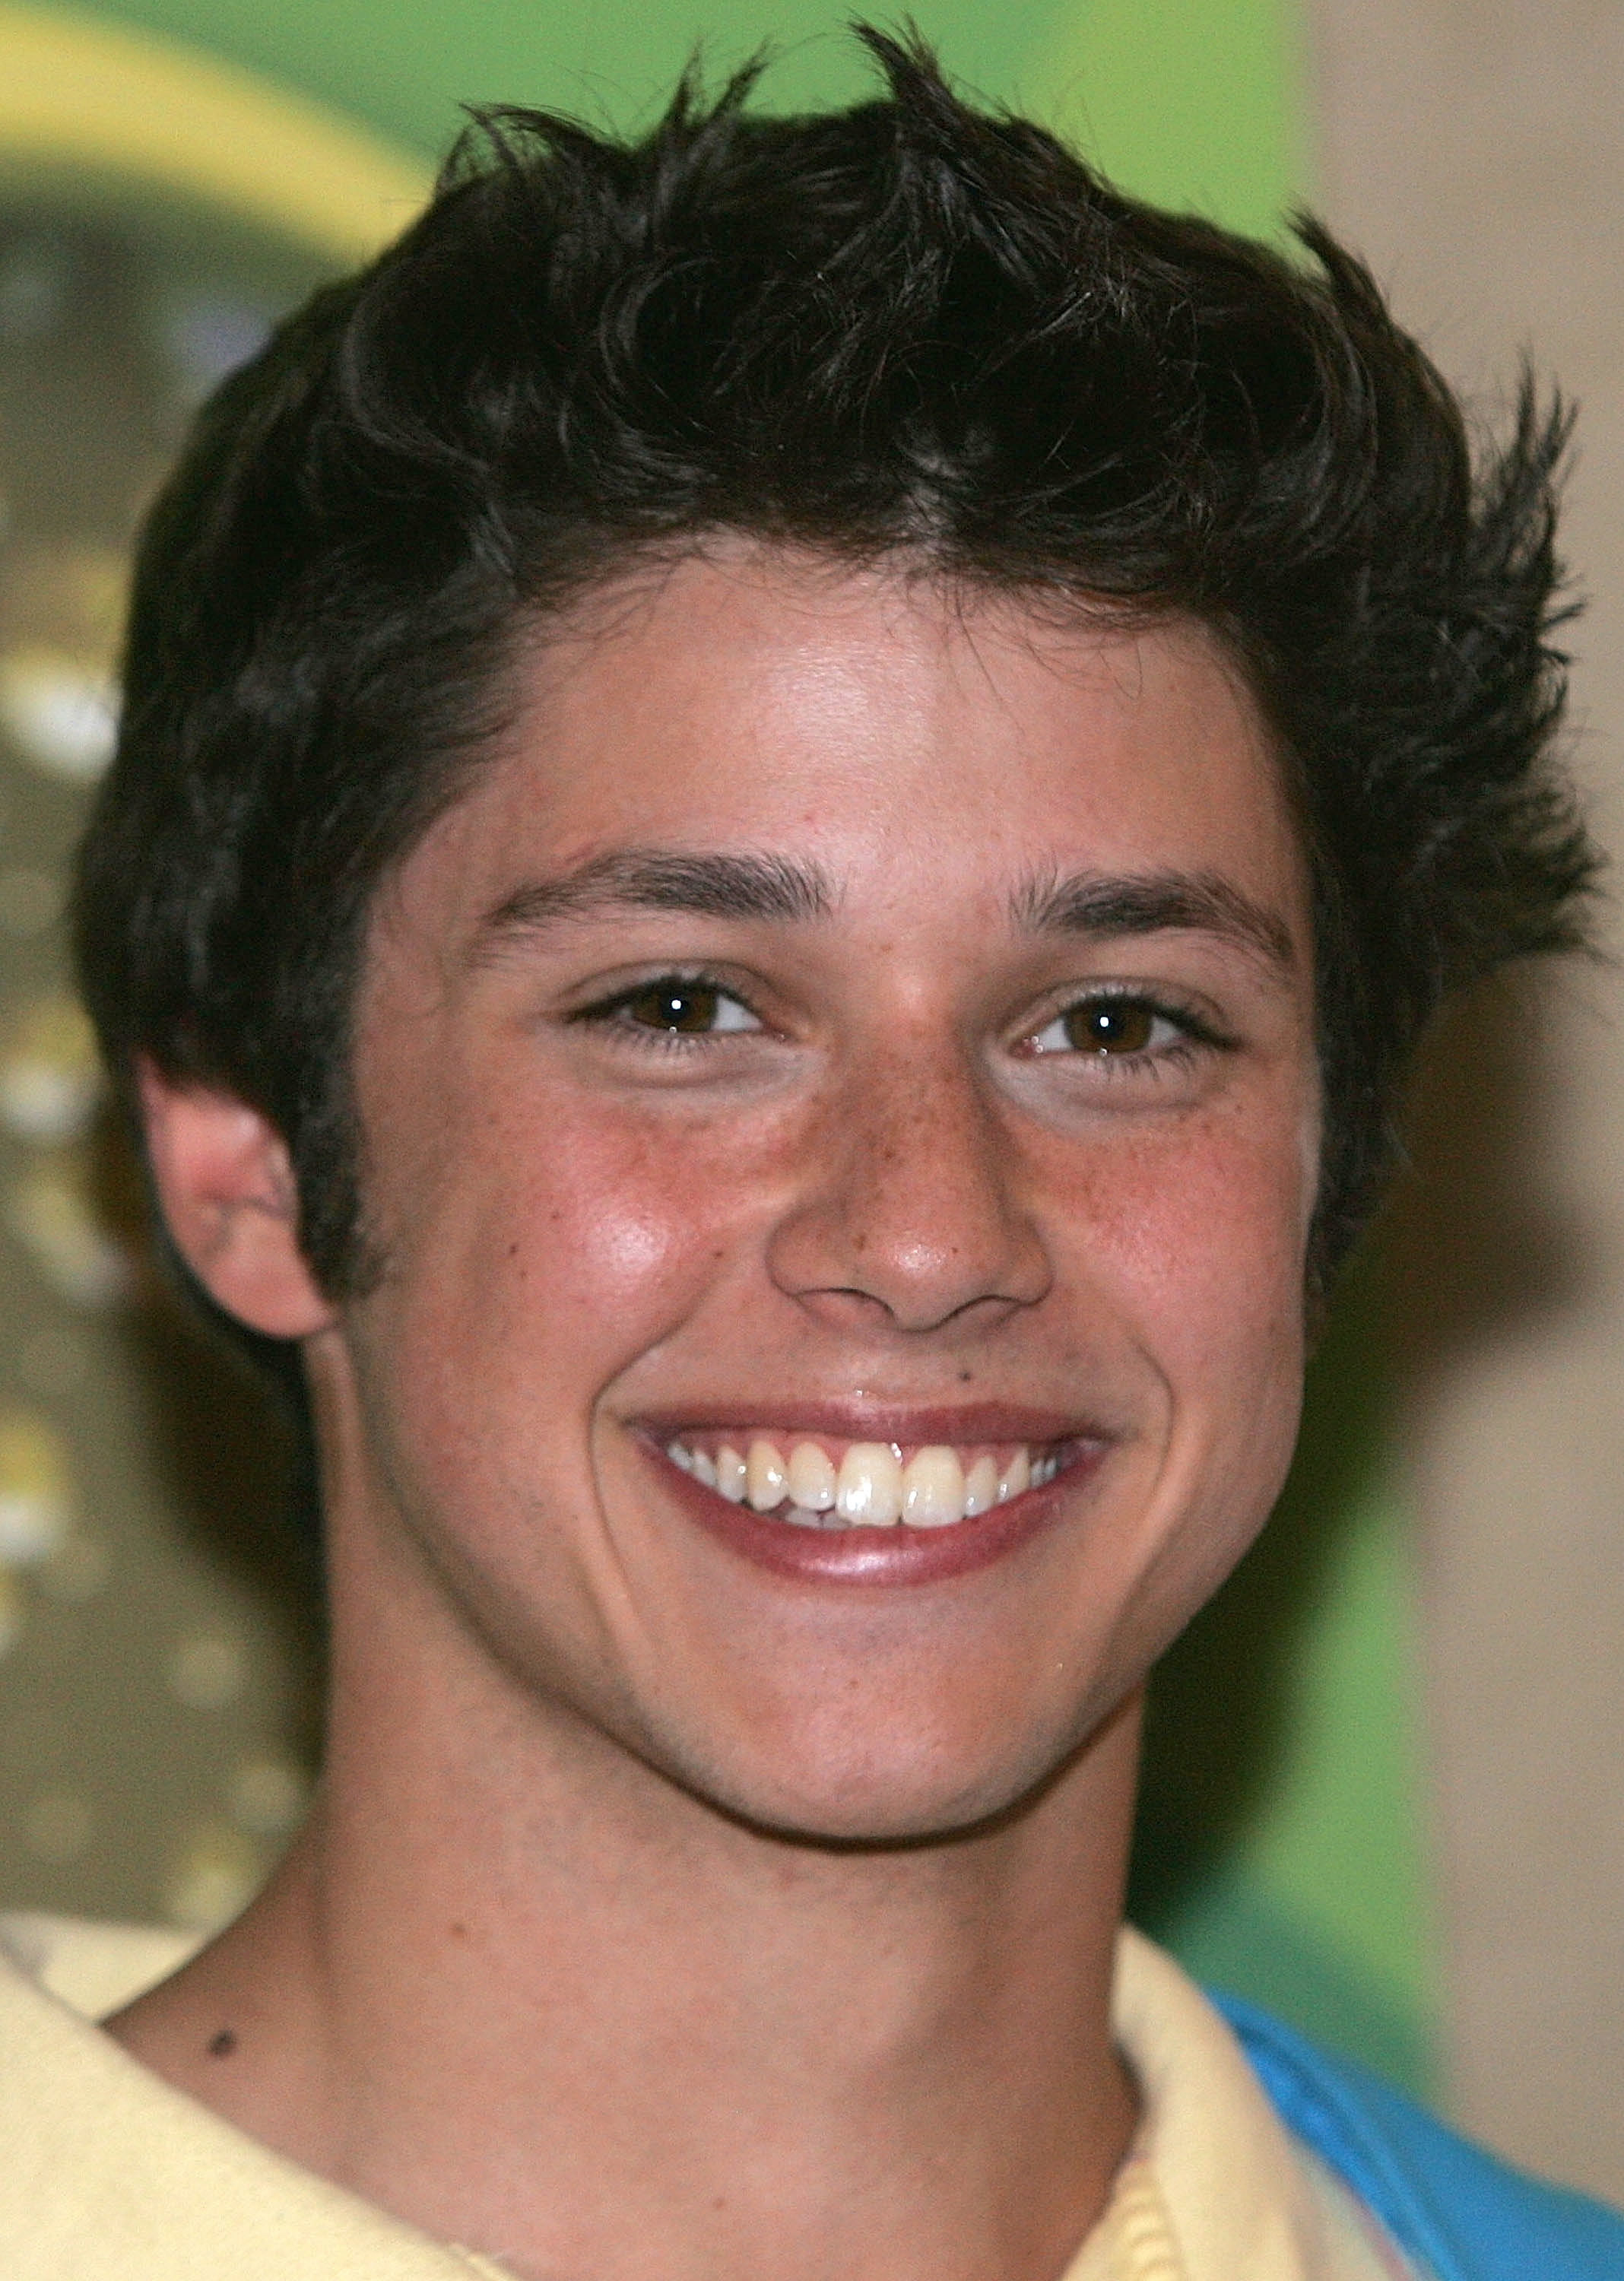 Raviv Ullman smiles at the &quot;Disney channel stars meet the press&quot; gathering on July 6, 2005